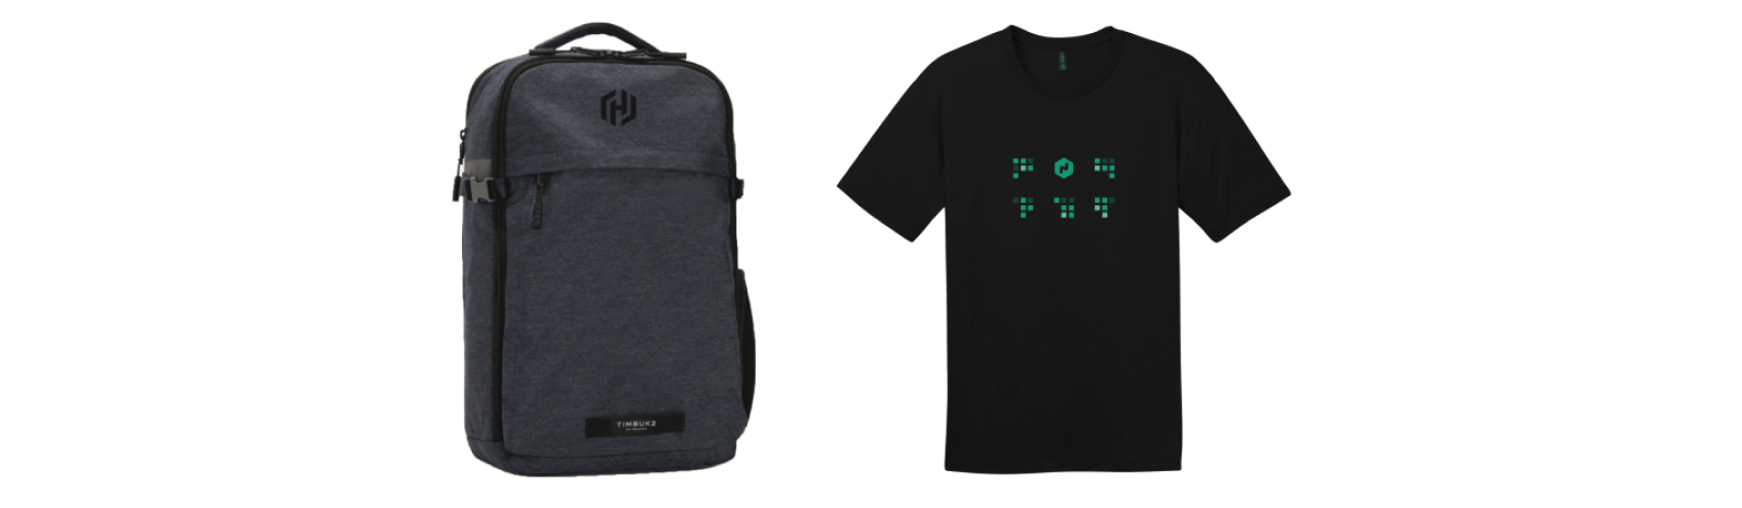 HashiCorp swag, backpack and t-shirt